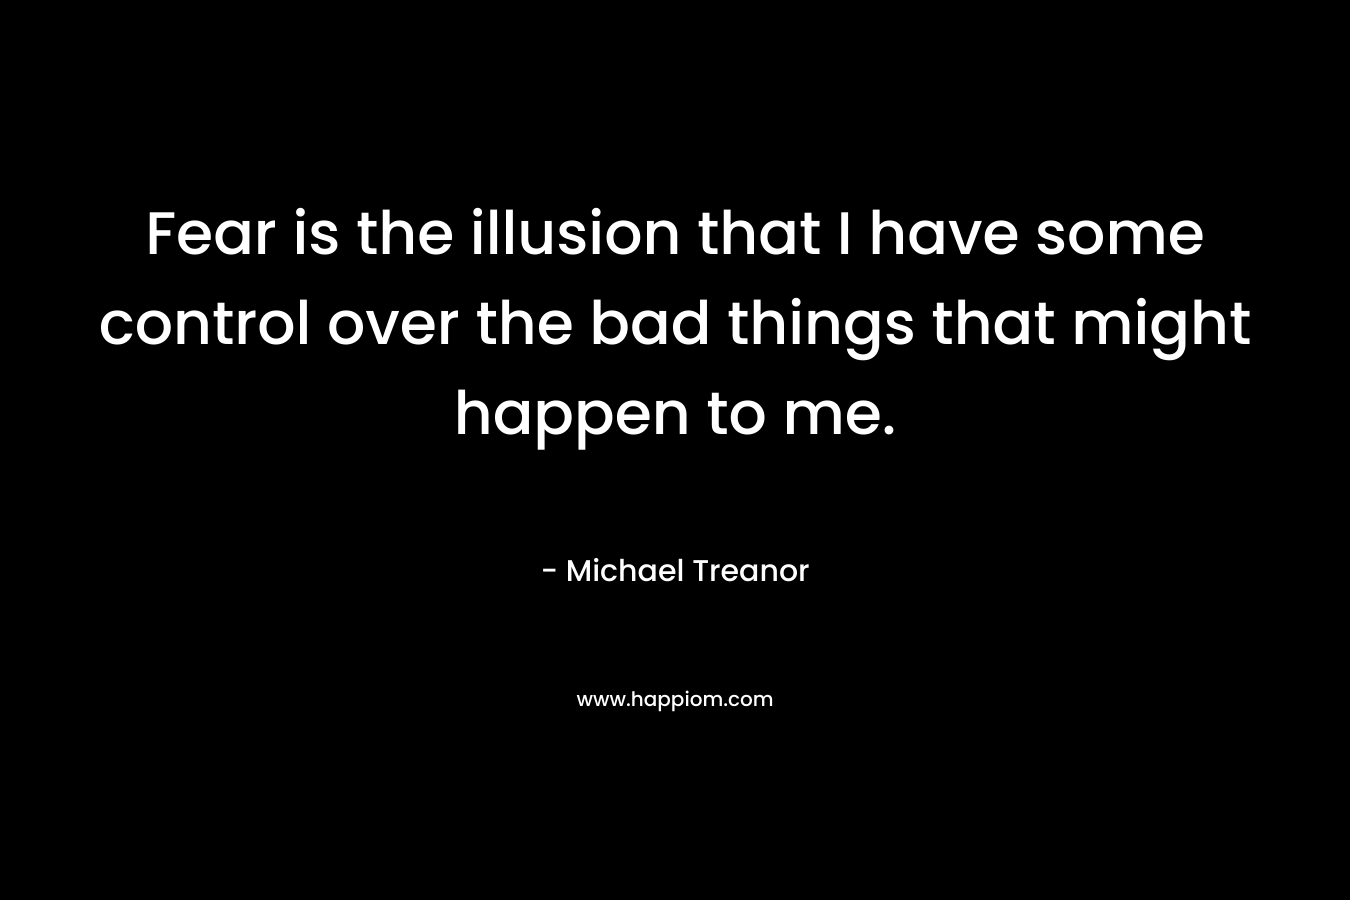 Fear is the illusion that I have some control over the bad things that might happen to me.